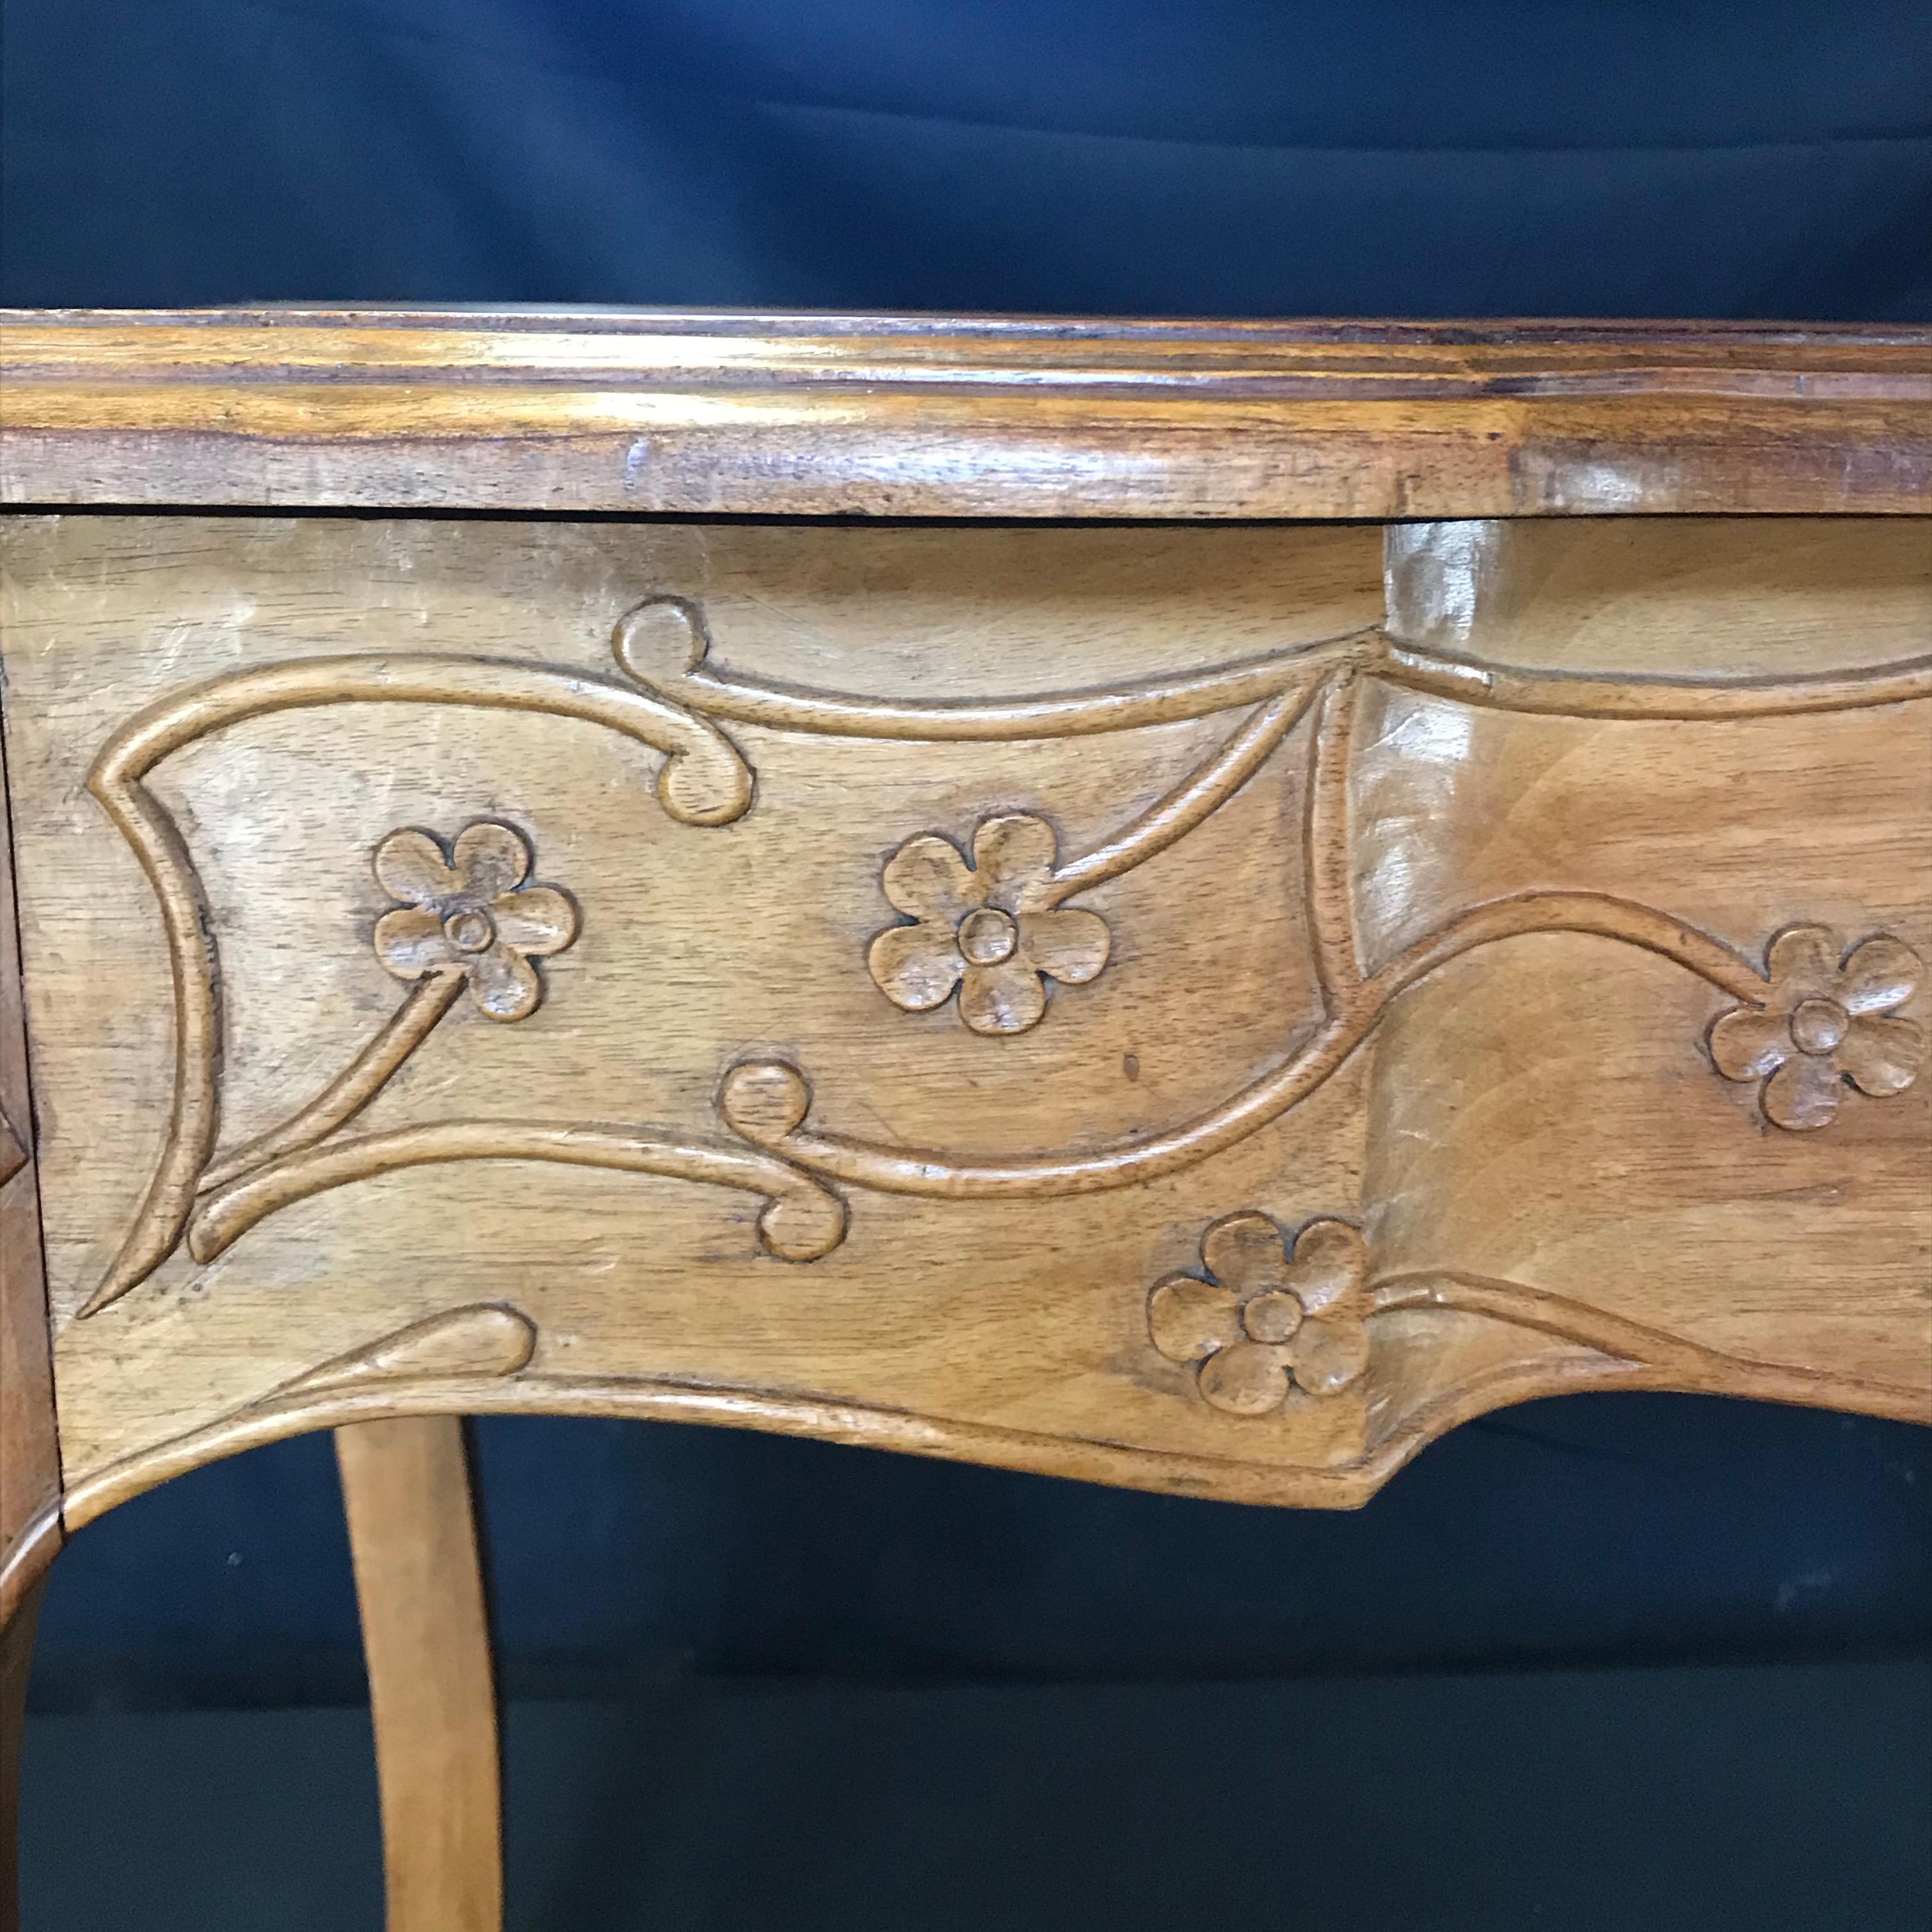 19th century country French Louis XV carved side table or desk. Can also be used as a game table. Hand carved floral and acanthus leaf artwork on the sides and cabriole legs. Gorgeous inset table top. 
Measures: Apron height 21.75
#3408.